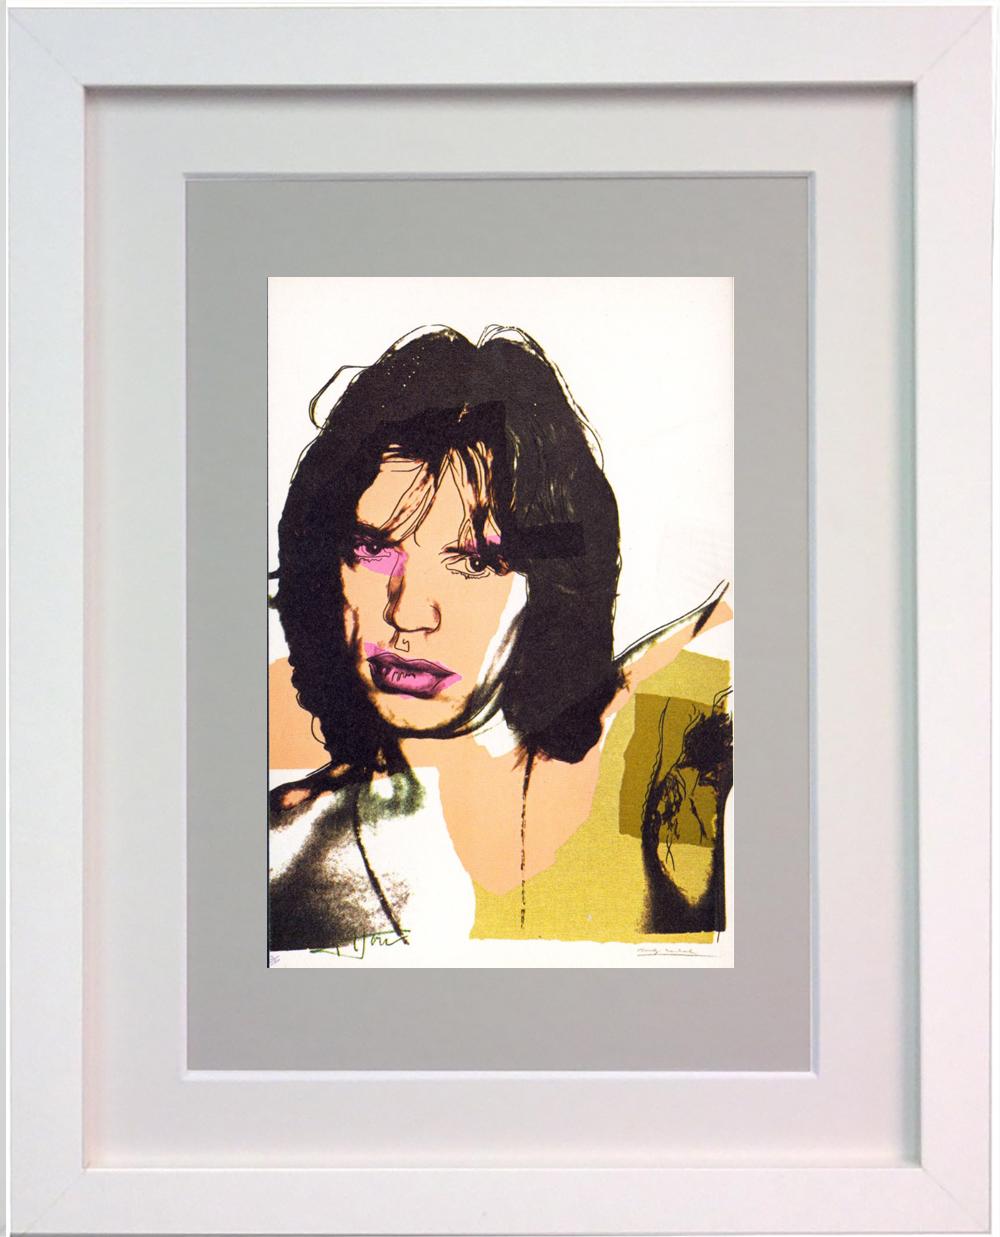 Why did Andy Warhol paint Mick Jagger?